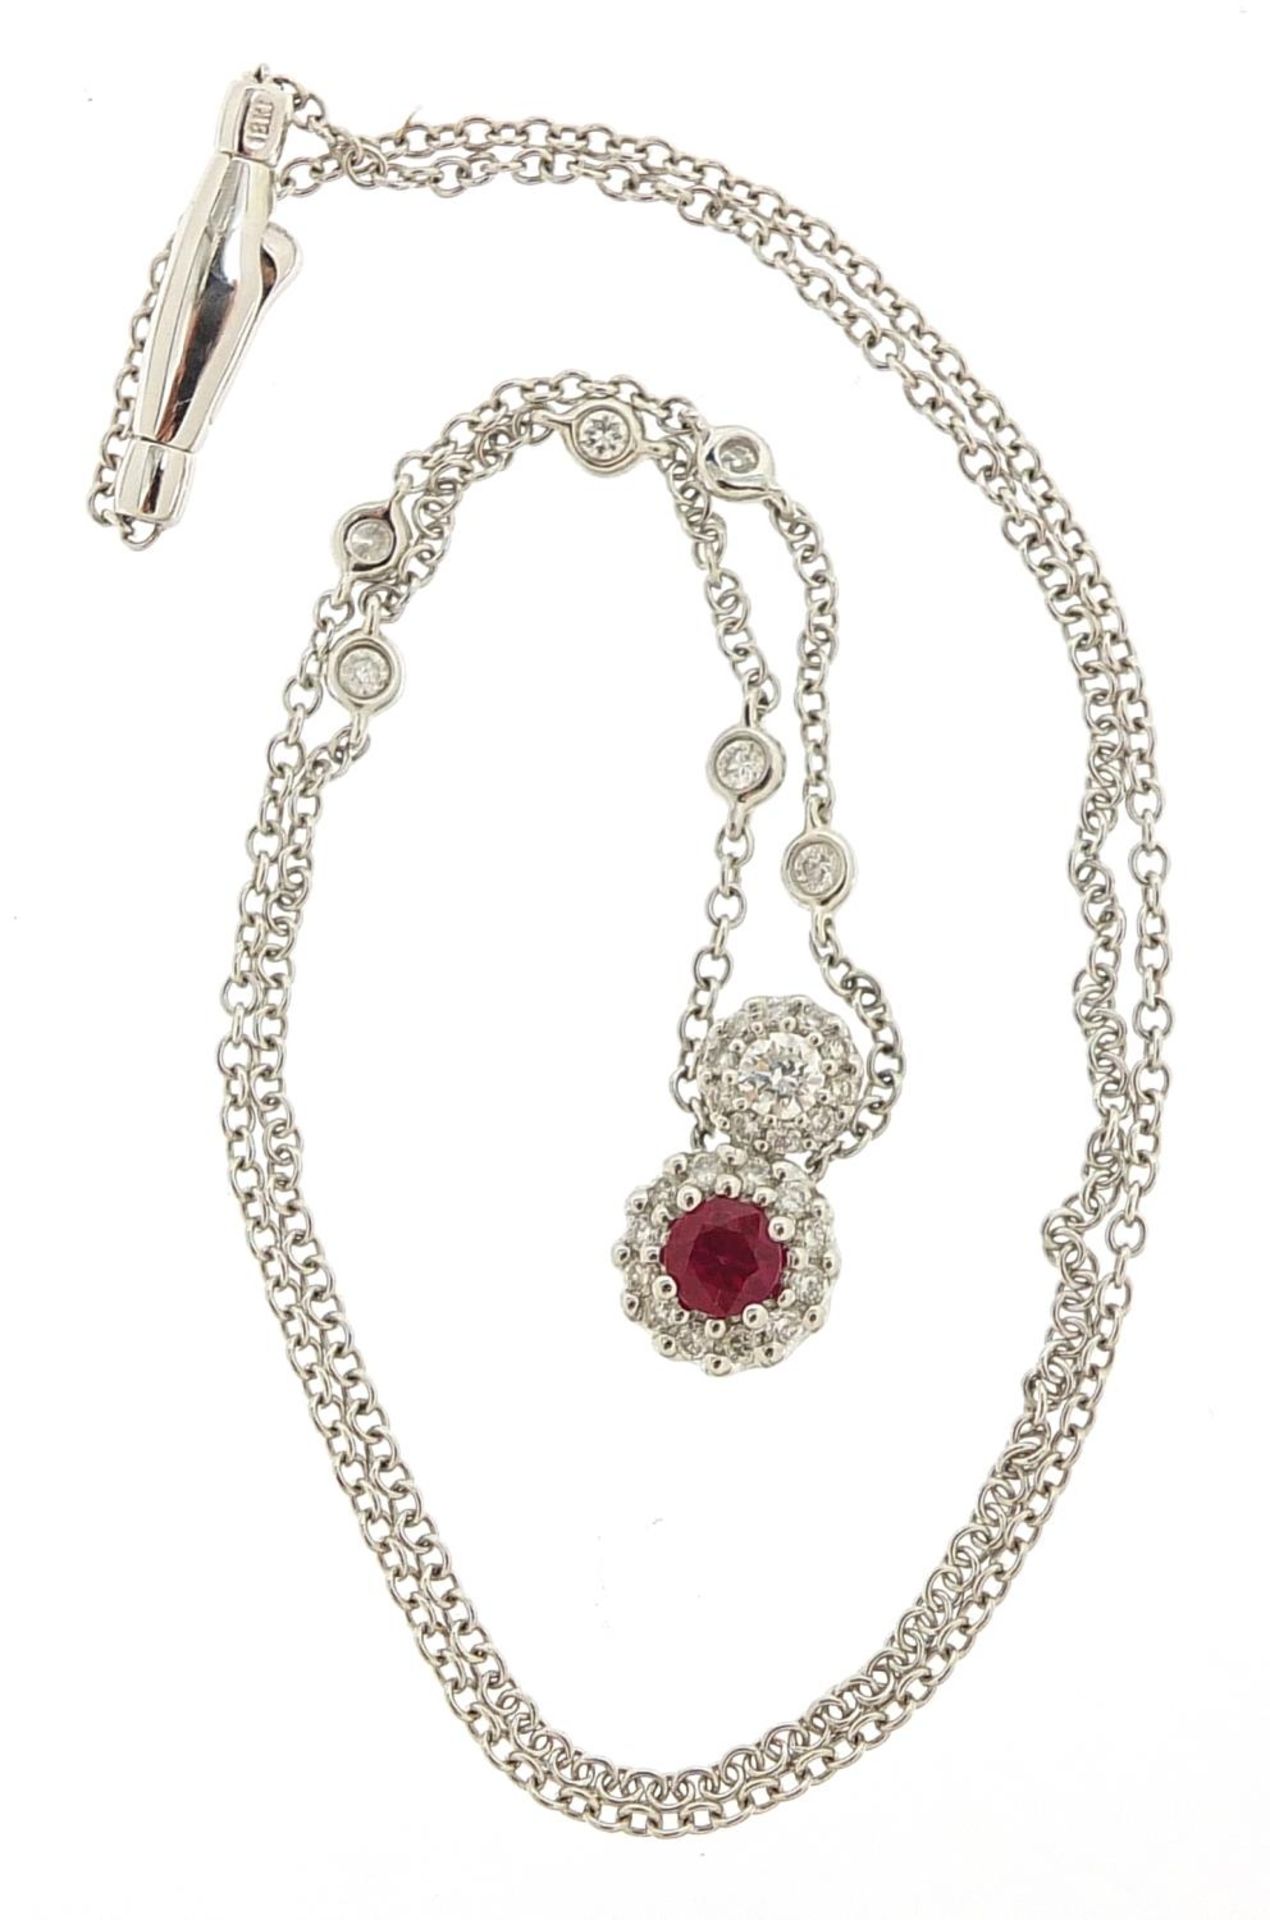 18ct white gold ruby and diamond necklace, stamped D 0.47 R 0.33, 40cm in length, 5.6g - Bild 2 aus 5